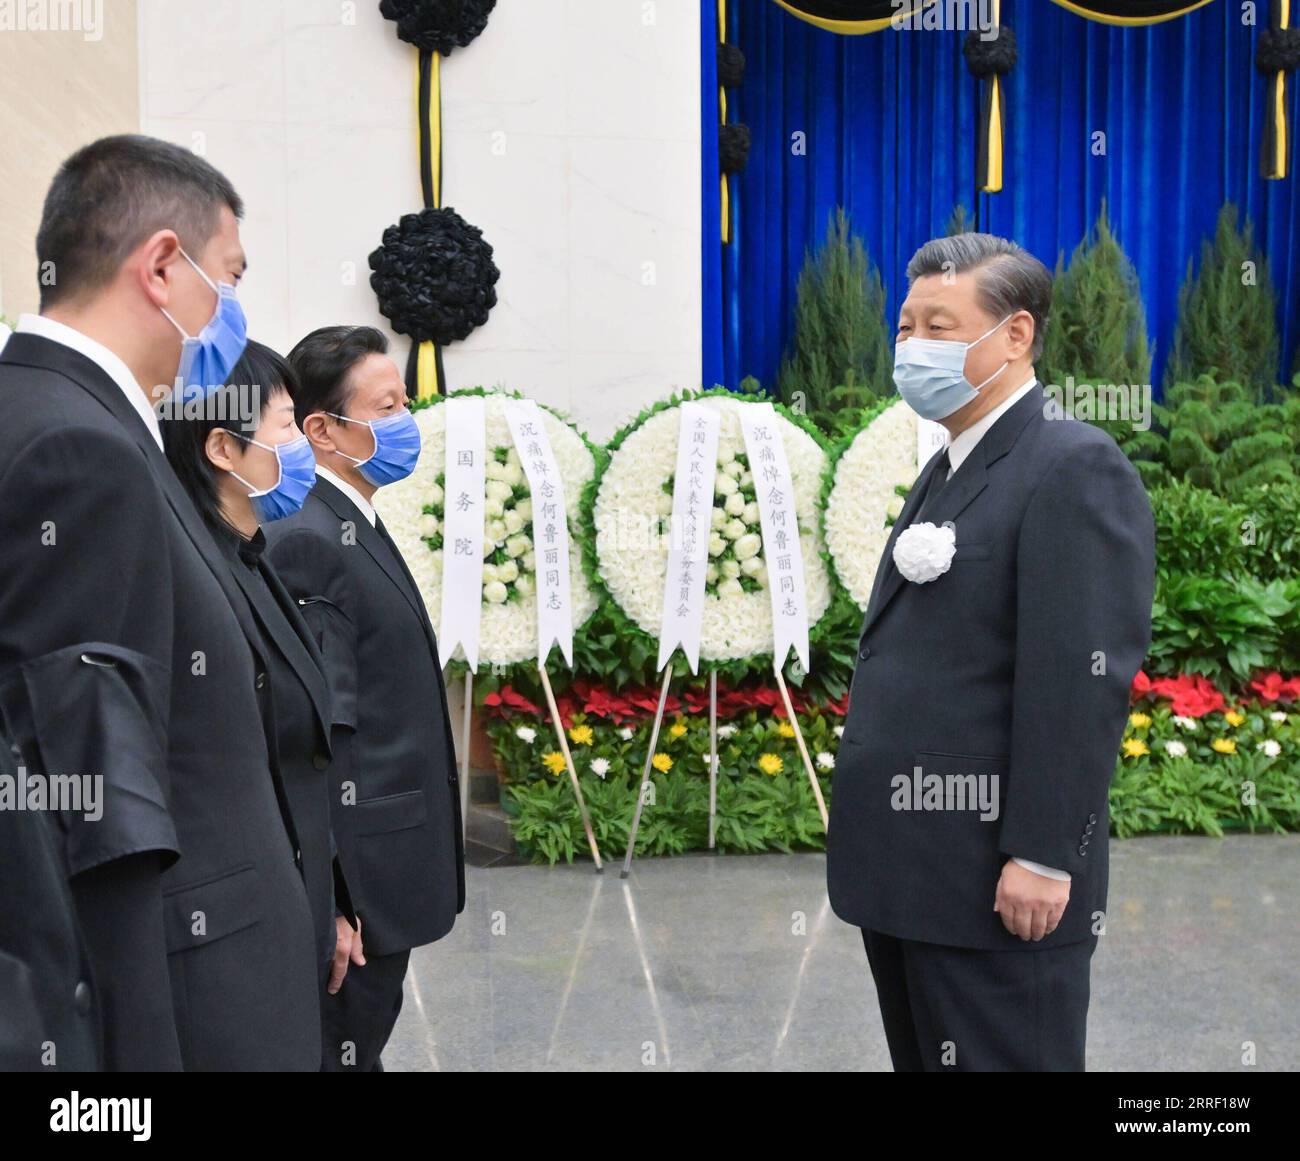 220323 -- BEIJING, March 23, 2022 -- Xi Jinping offers his condolences to He Luli s family, in Beijing, capital of China, March 23, 2022. He Luli, former leader of the Revolutionary Committee of the Chinese Kuomintang, was cremated in Beijing on Wednesday. Xi Jinping, Li Zhanshu, and Wang Yang attended the funeral at the Babaoshan Revolutionary Cemetery on Wednesday morning.  CHINA-BEIJING-HE LULI-CREMATION CN LixTao PUBLICATIONxNOTxINxCHN Stock Photo